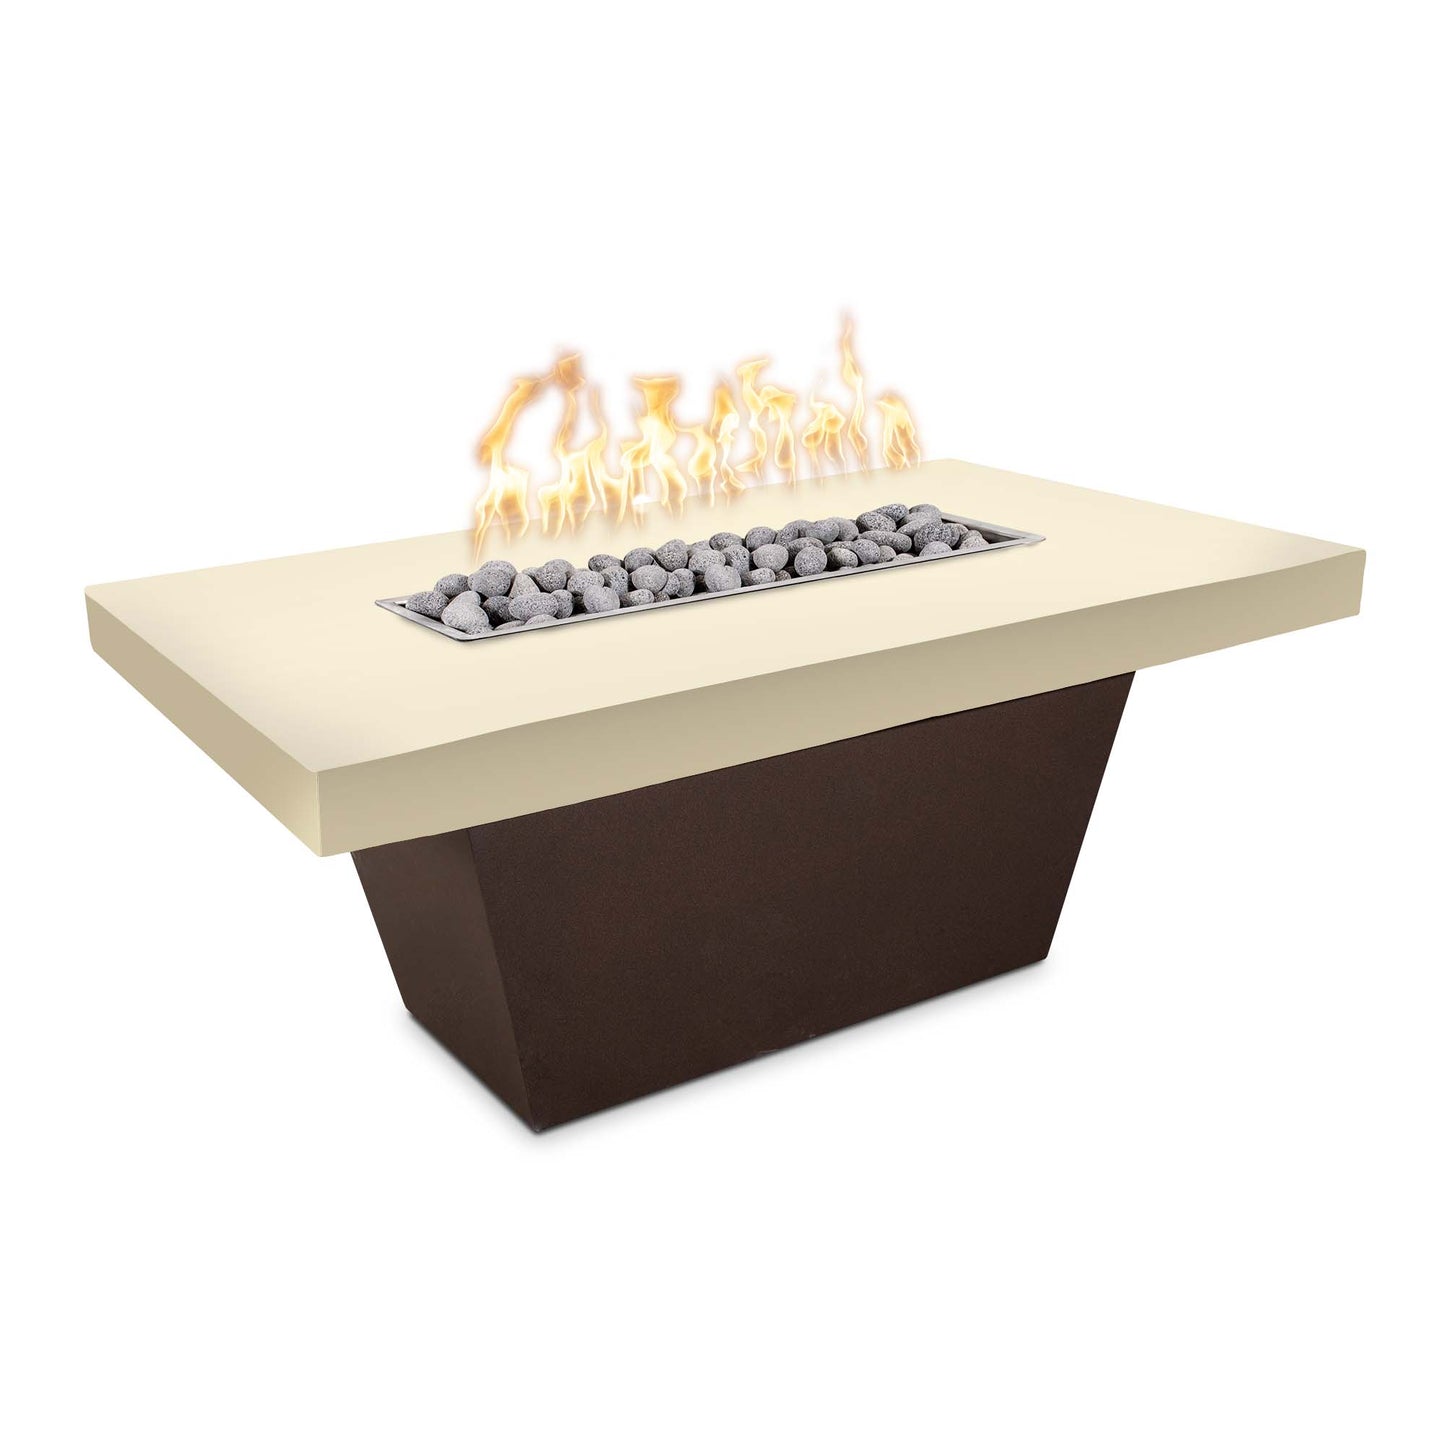 The Outdoor Plus Tacoma 48" Natural Gray Concrete Top & Pewter Powder Coated Base Natural Gas Fire Table with Match Lit Ignition